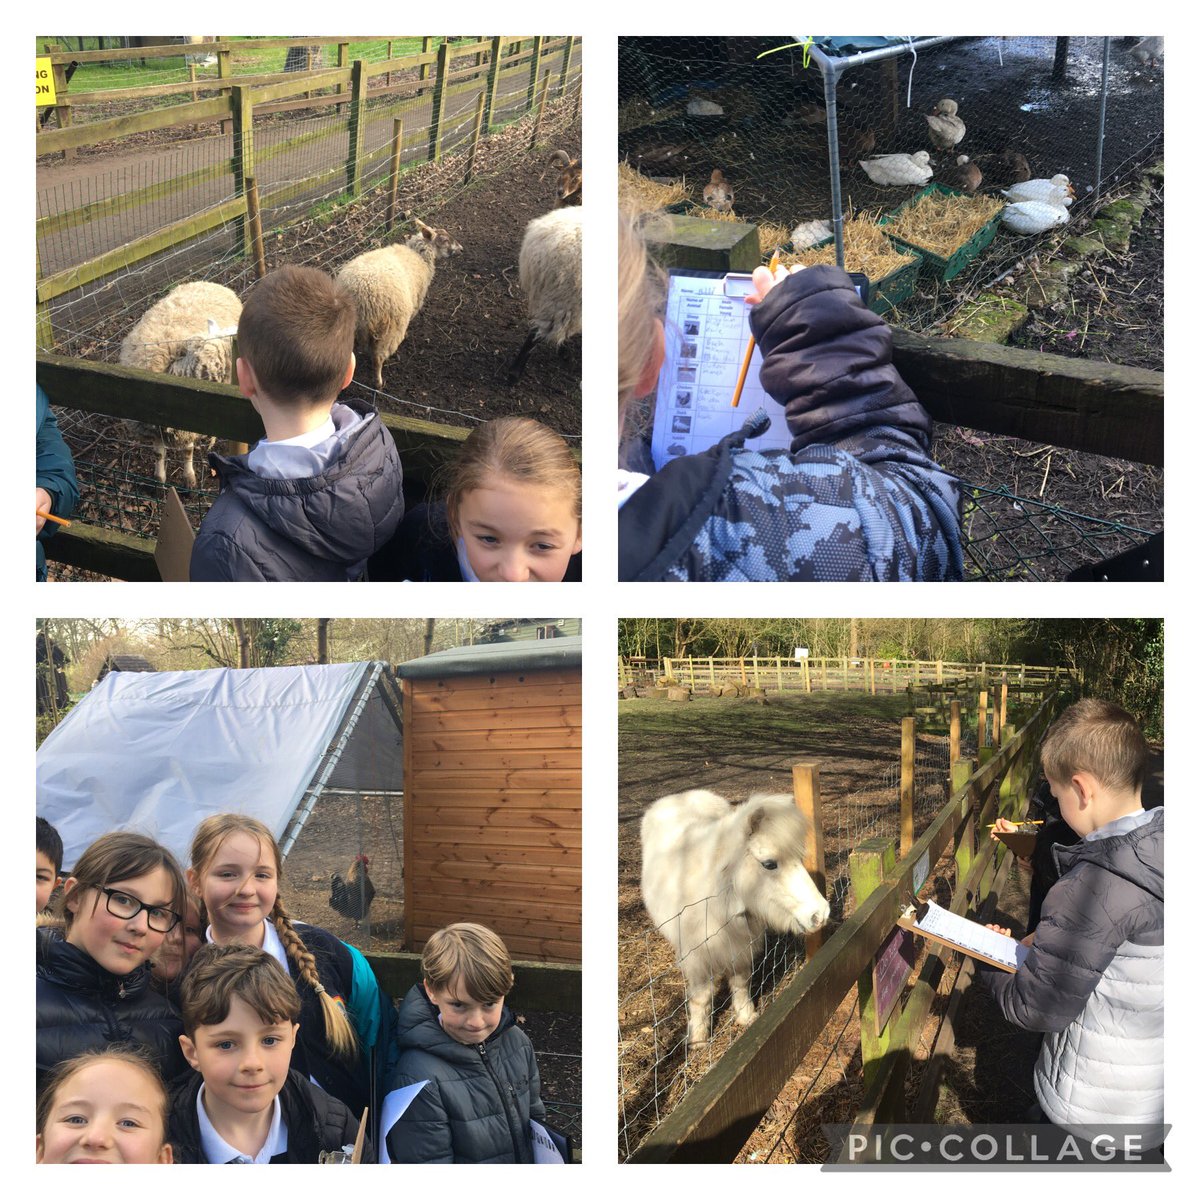 Just a few Y5 pics from down on the farm today😁🐇🐖🐑🐐🦙. They also impressed with their life cycles and classification knowledge. More to follow!!
#TamOShanter #WeAreCastleway